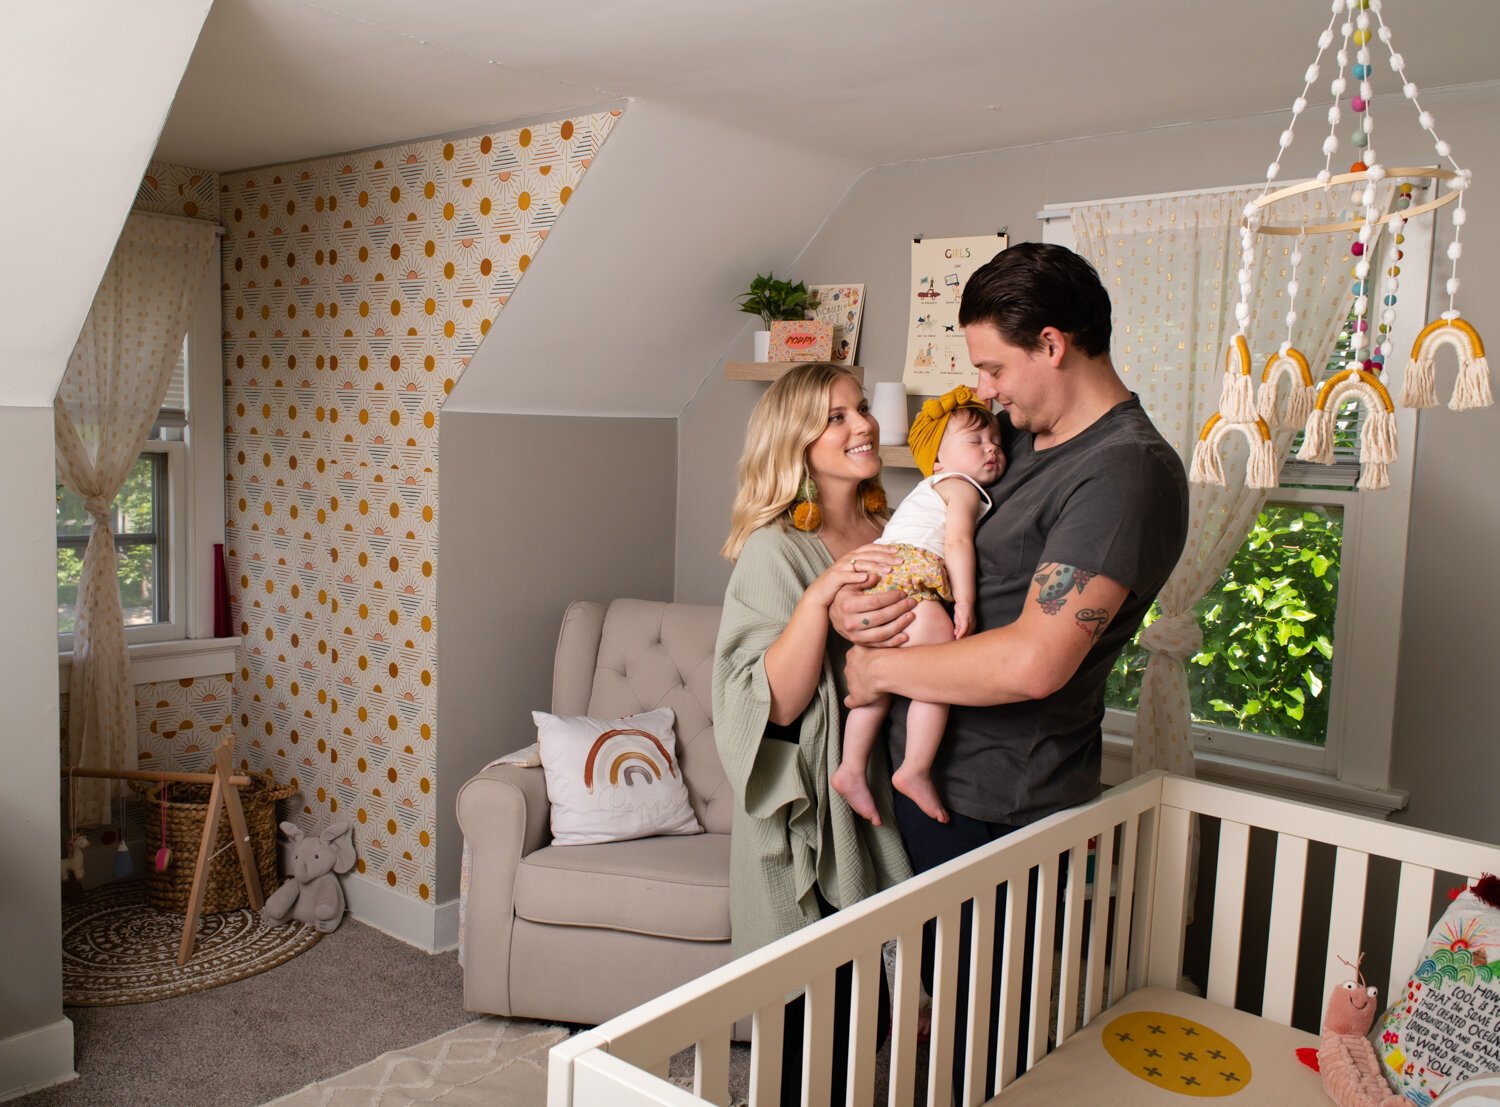 Katie Fyfe and her fiancé, Andy Gelwicks, with their 8-month-old daughter, Poppy, in Poppy’s room.  